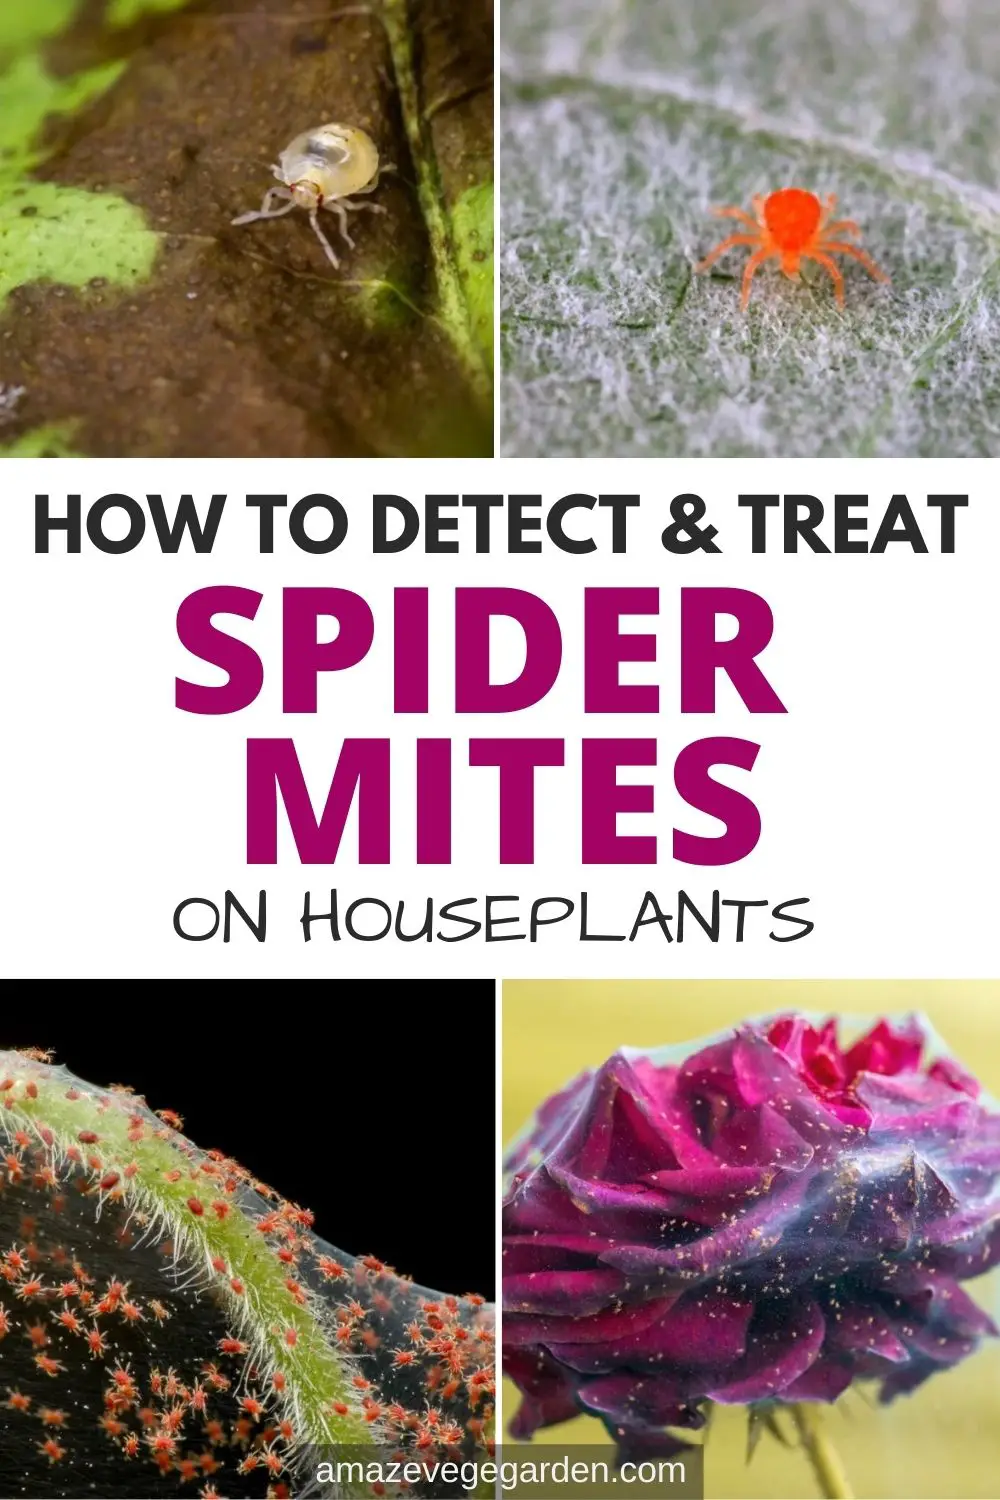 How To Detect and Treat Spider Mites On Houseplants